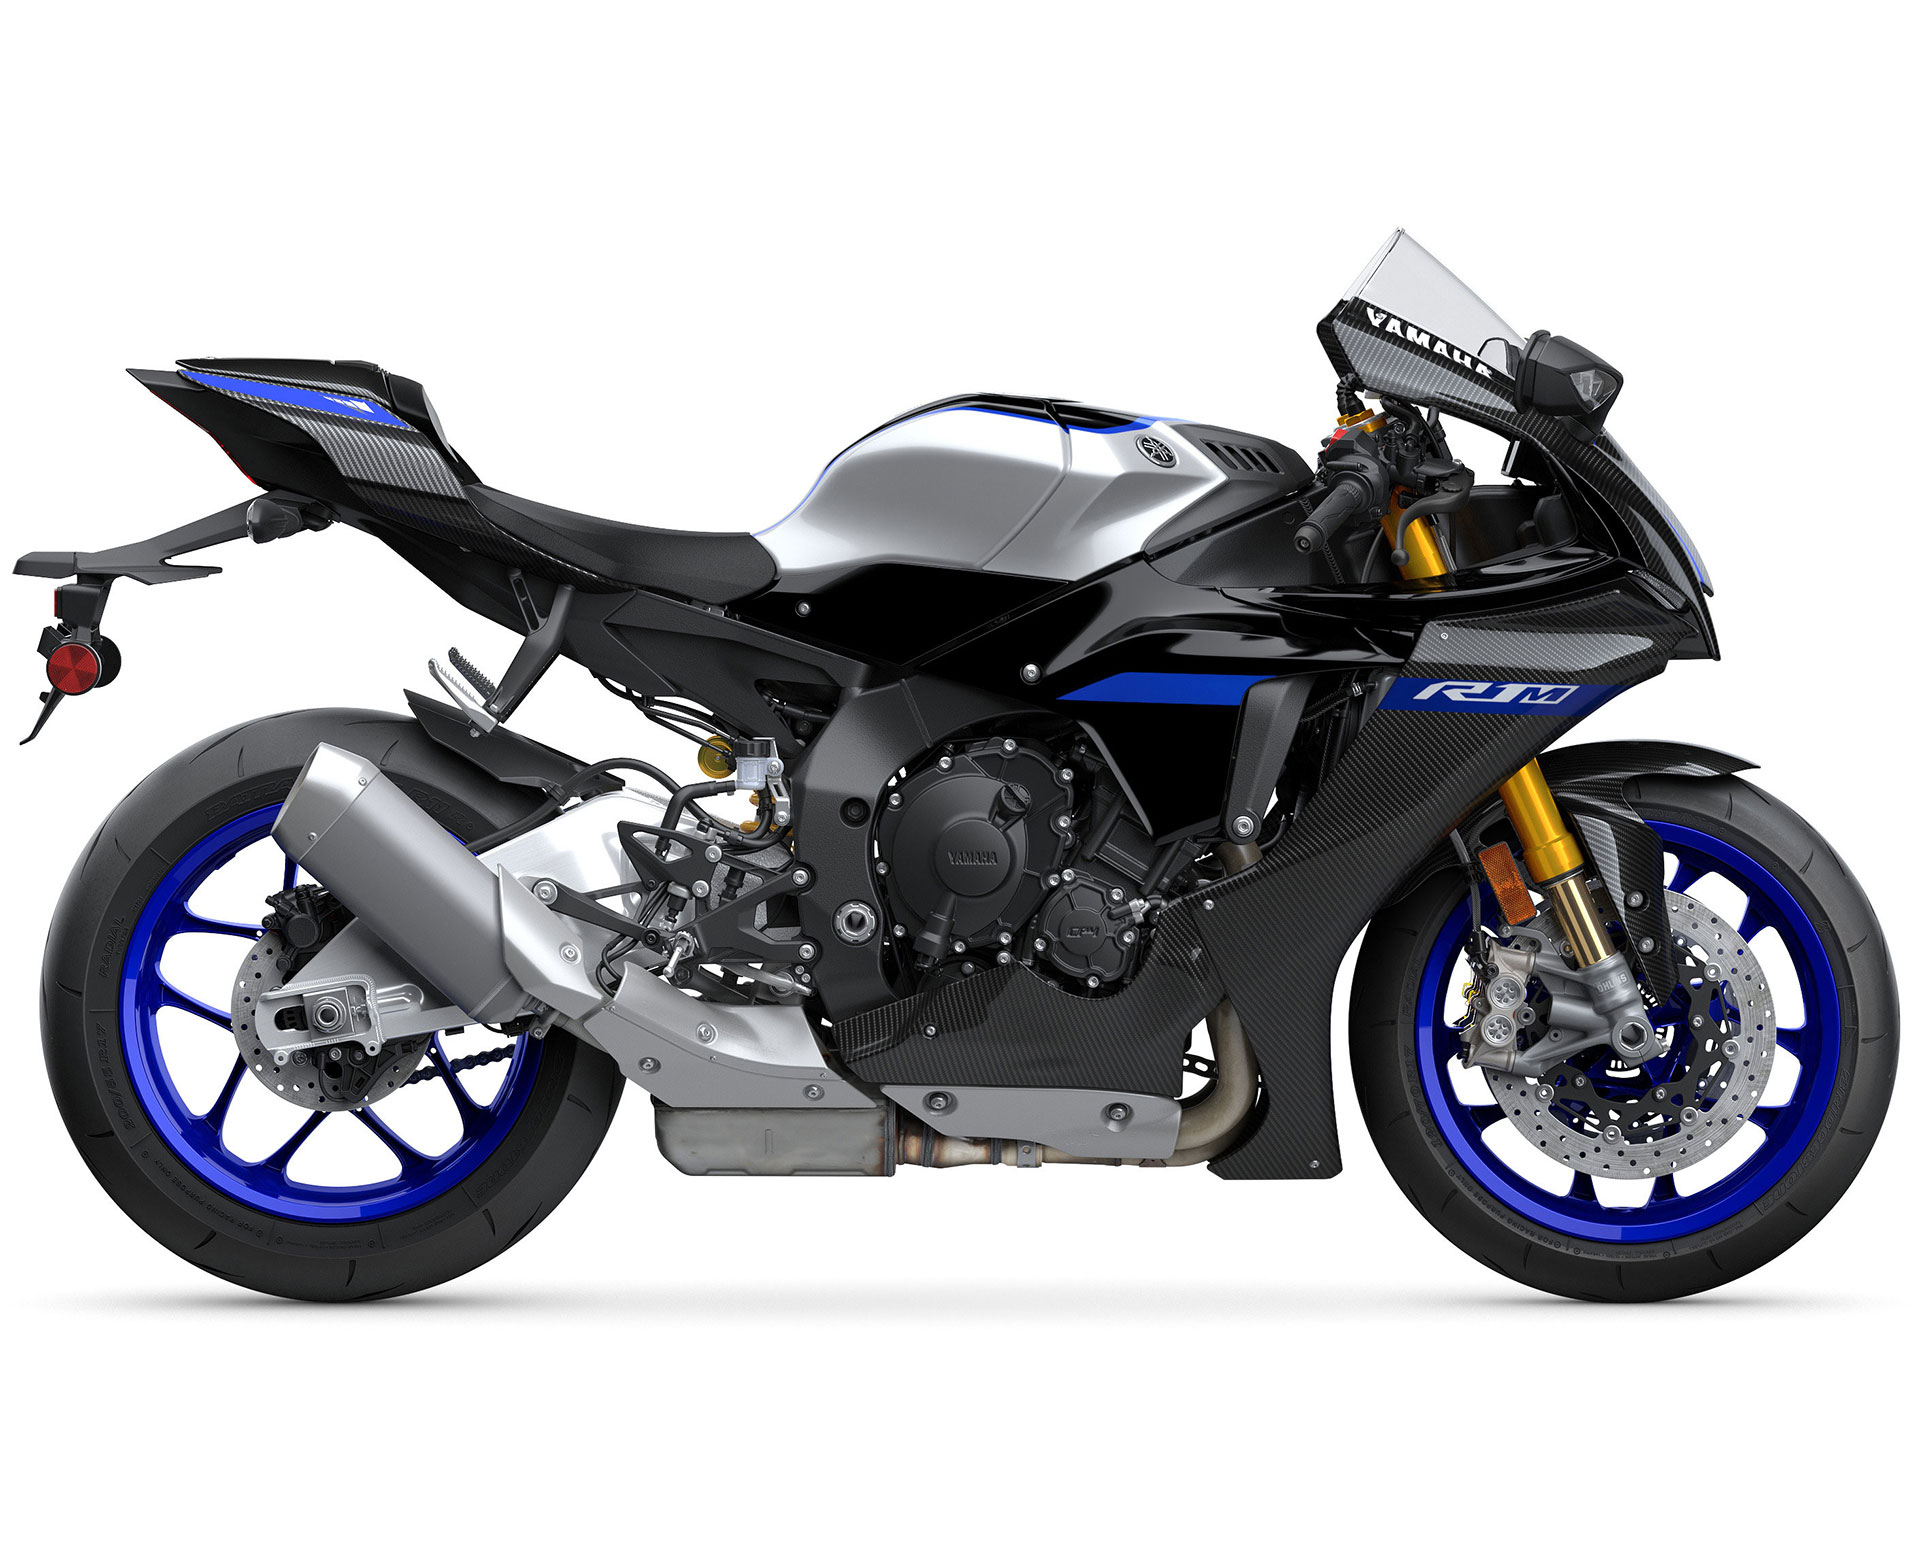 Thumbnail of your customized 2023 YZF-R1M